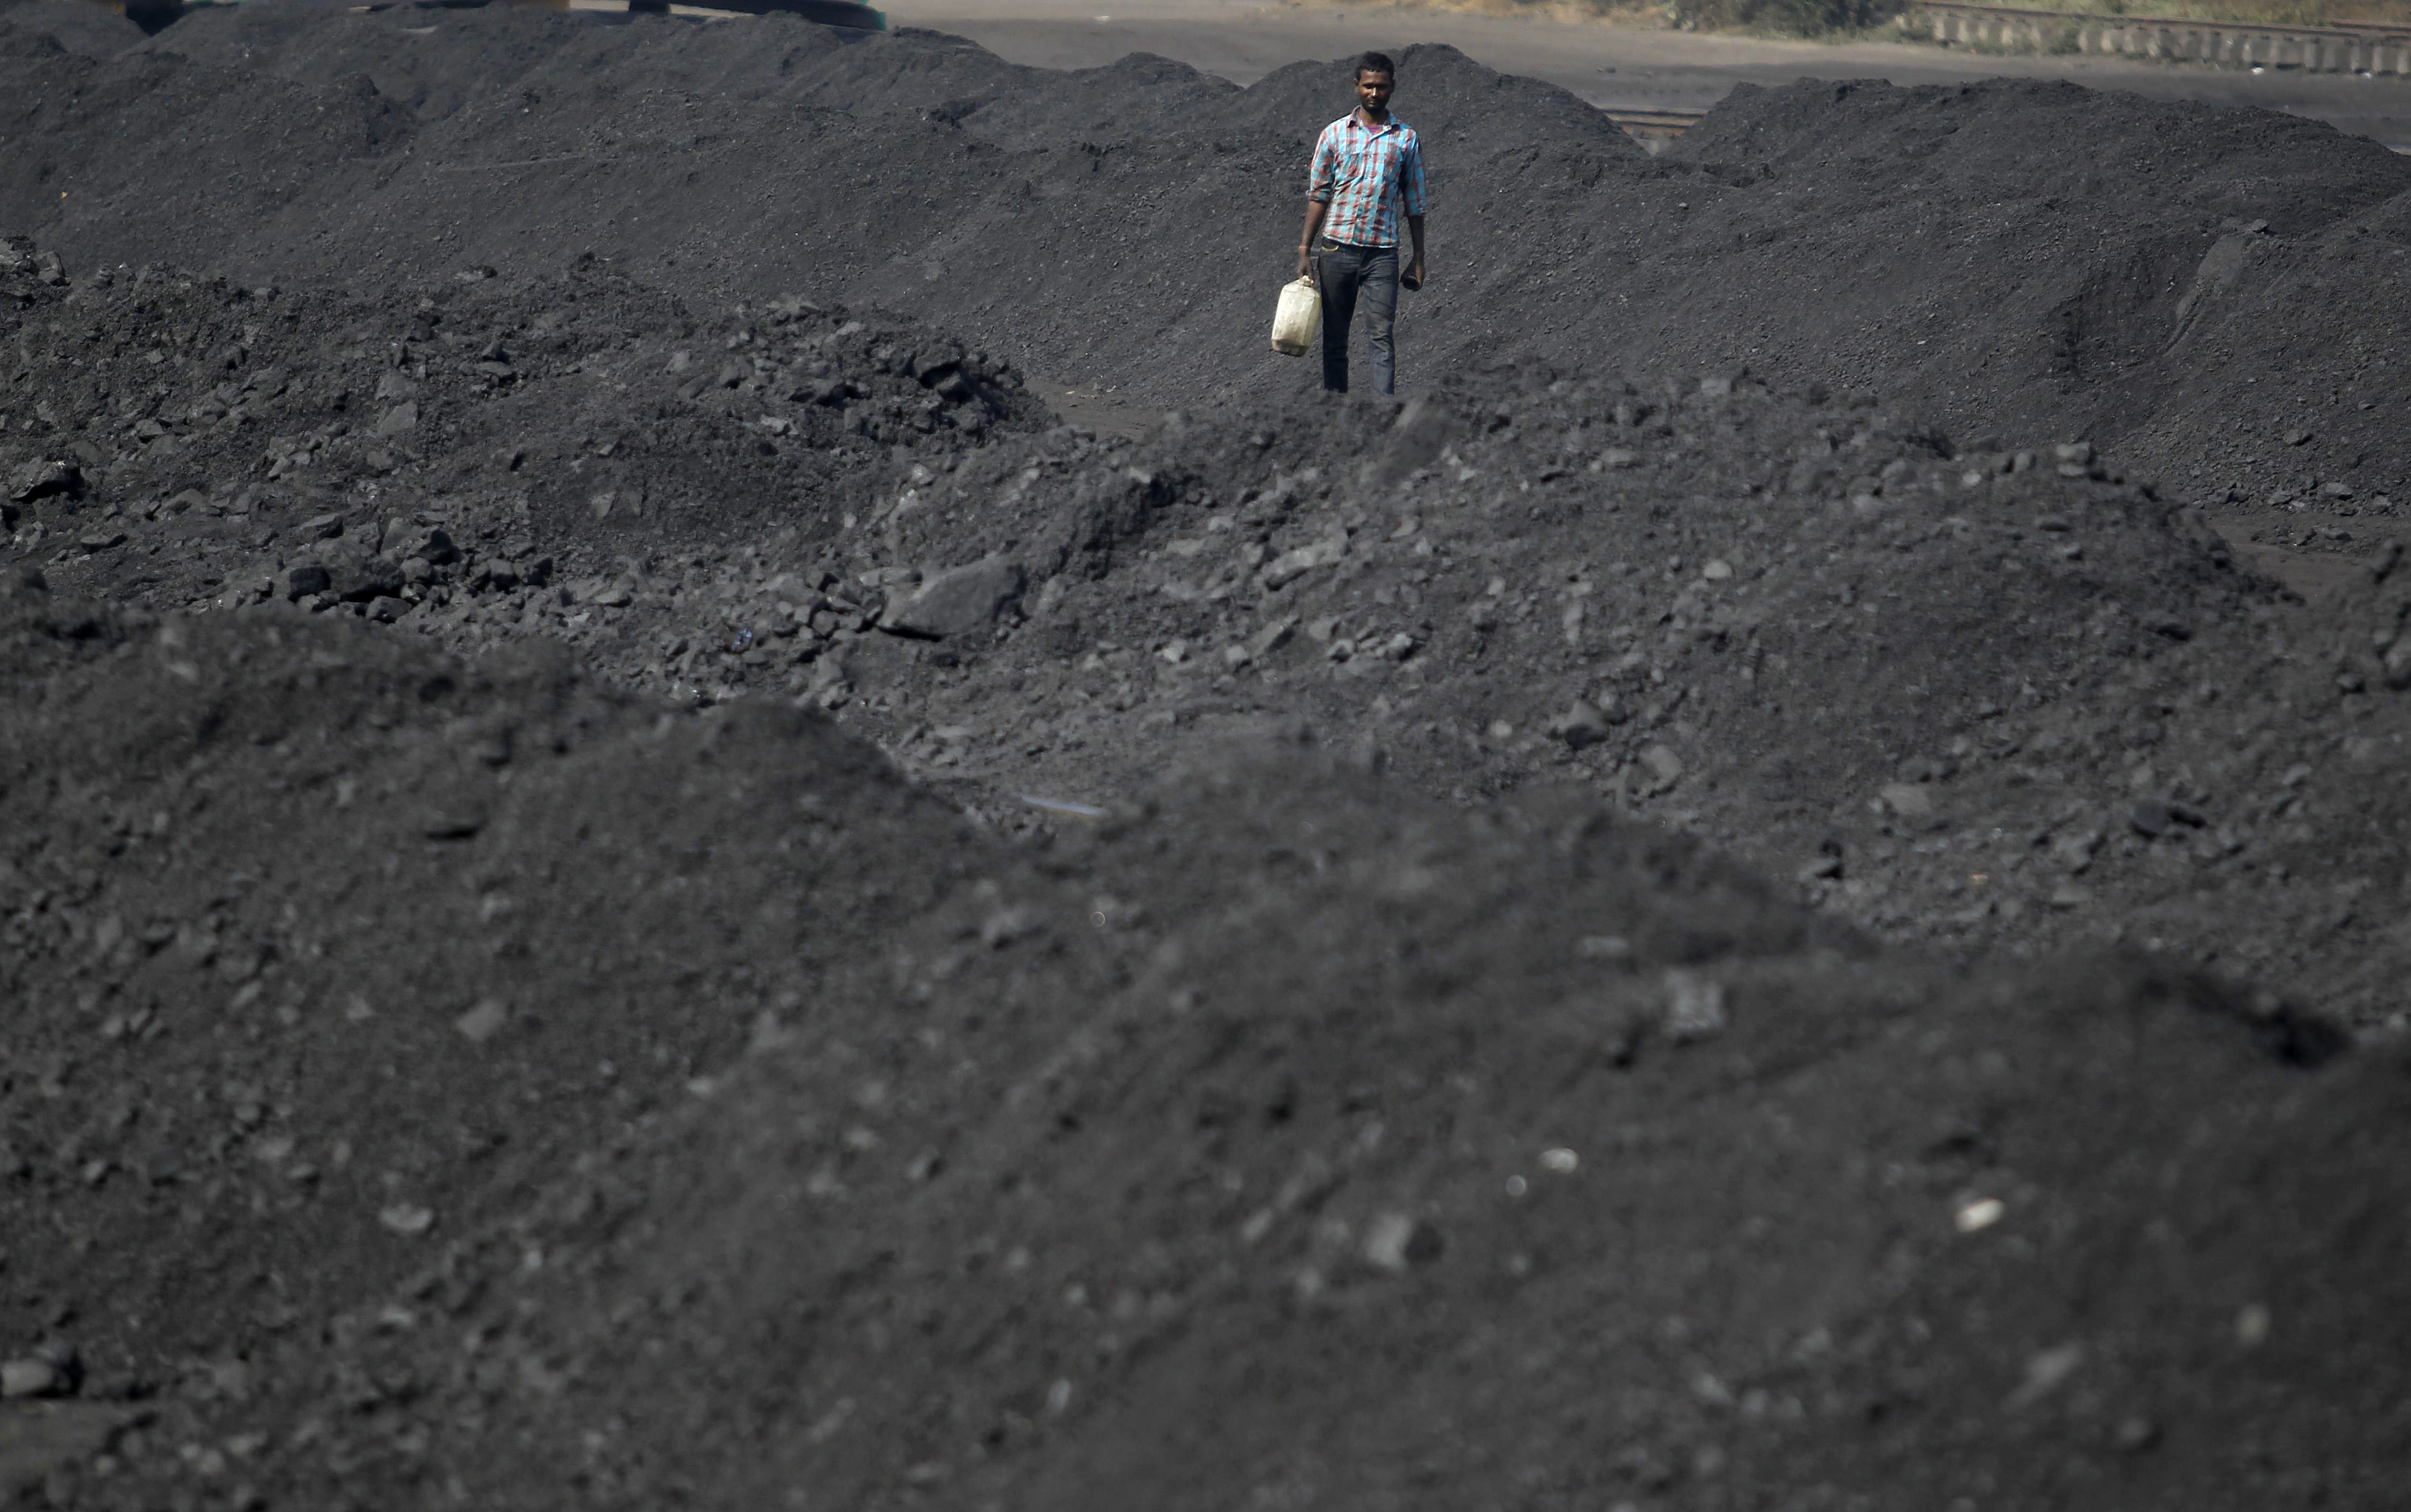 A worker carries a container filled with drinking water at a railway coal yard on the outskirts of Ahmedabad